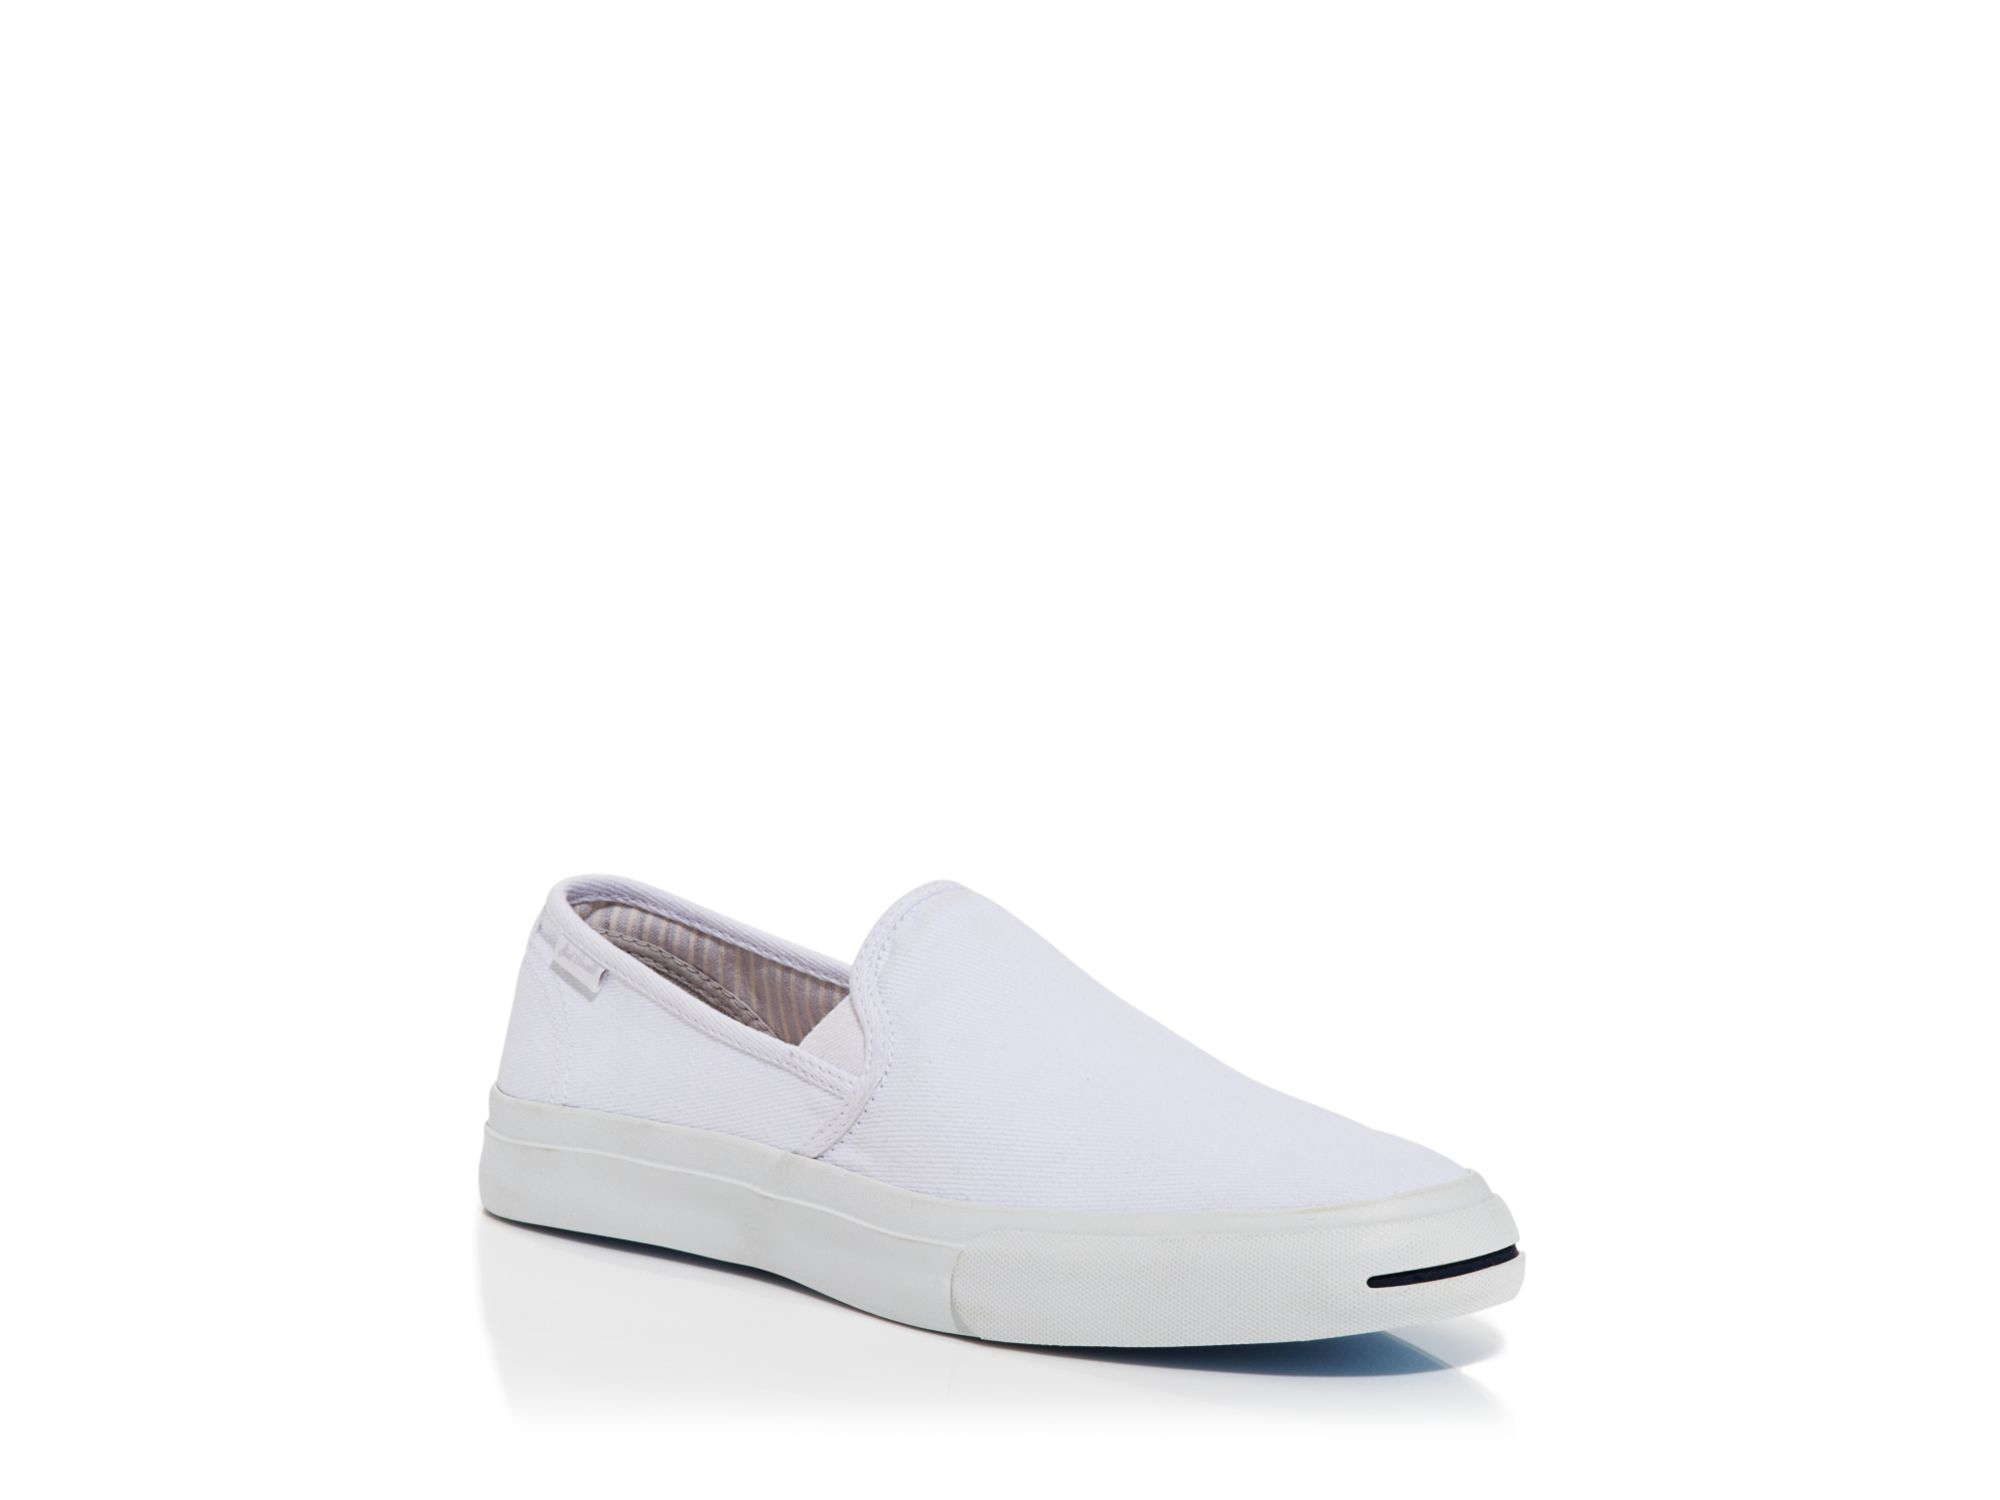 Converse Jack Purcell Slip On Sneakers 